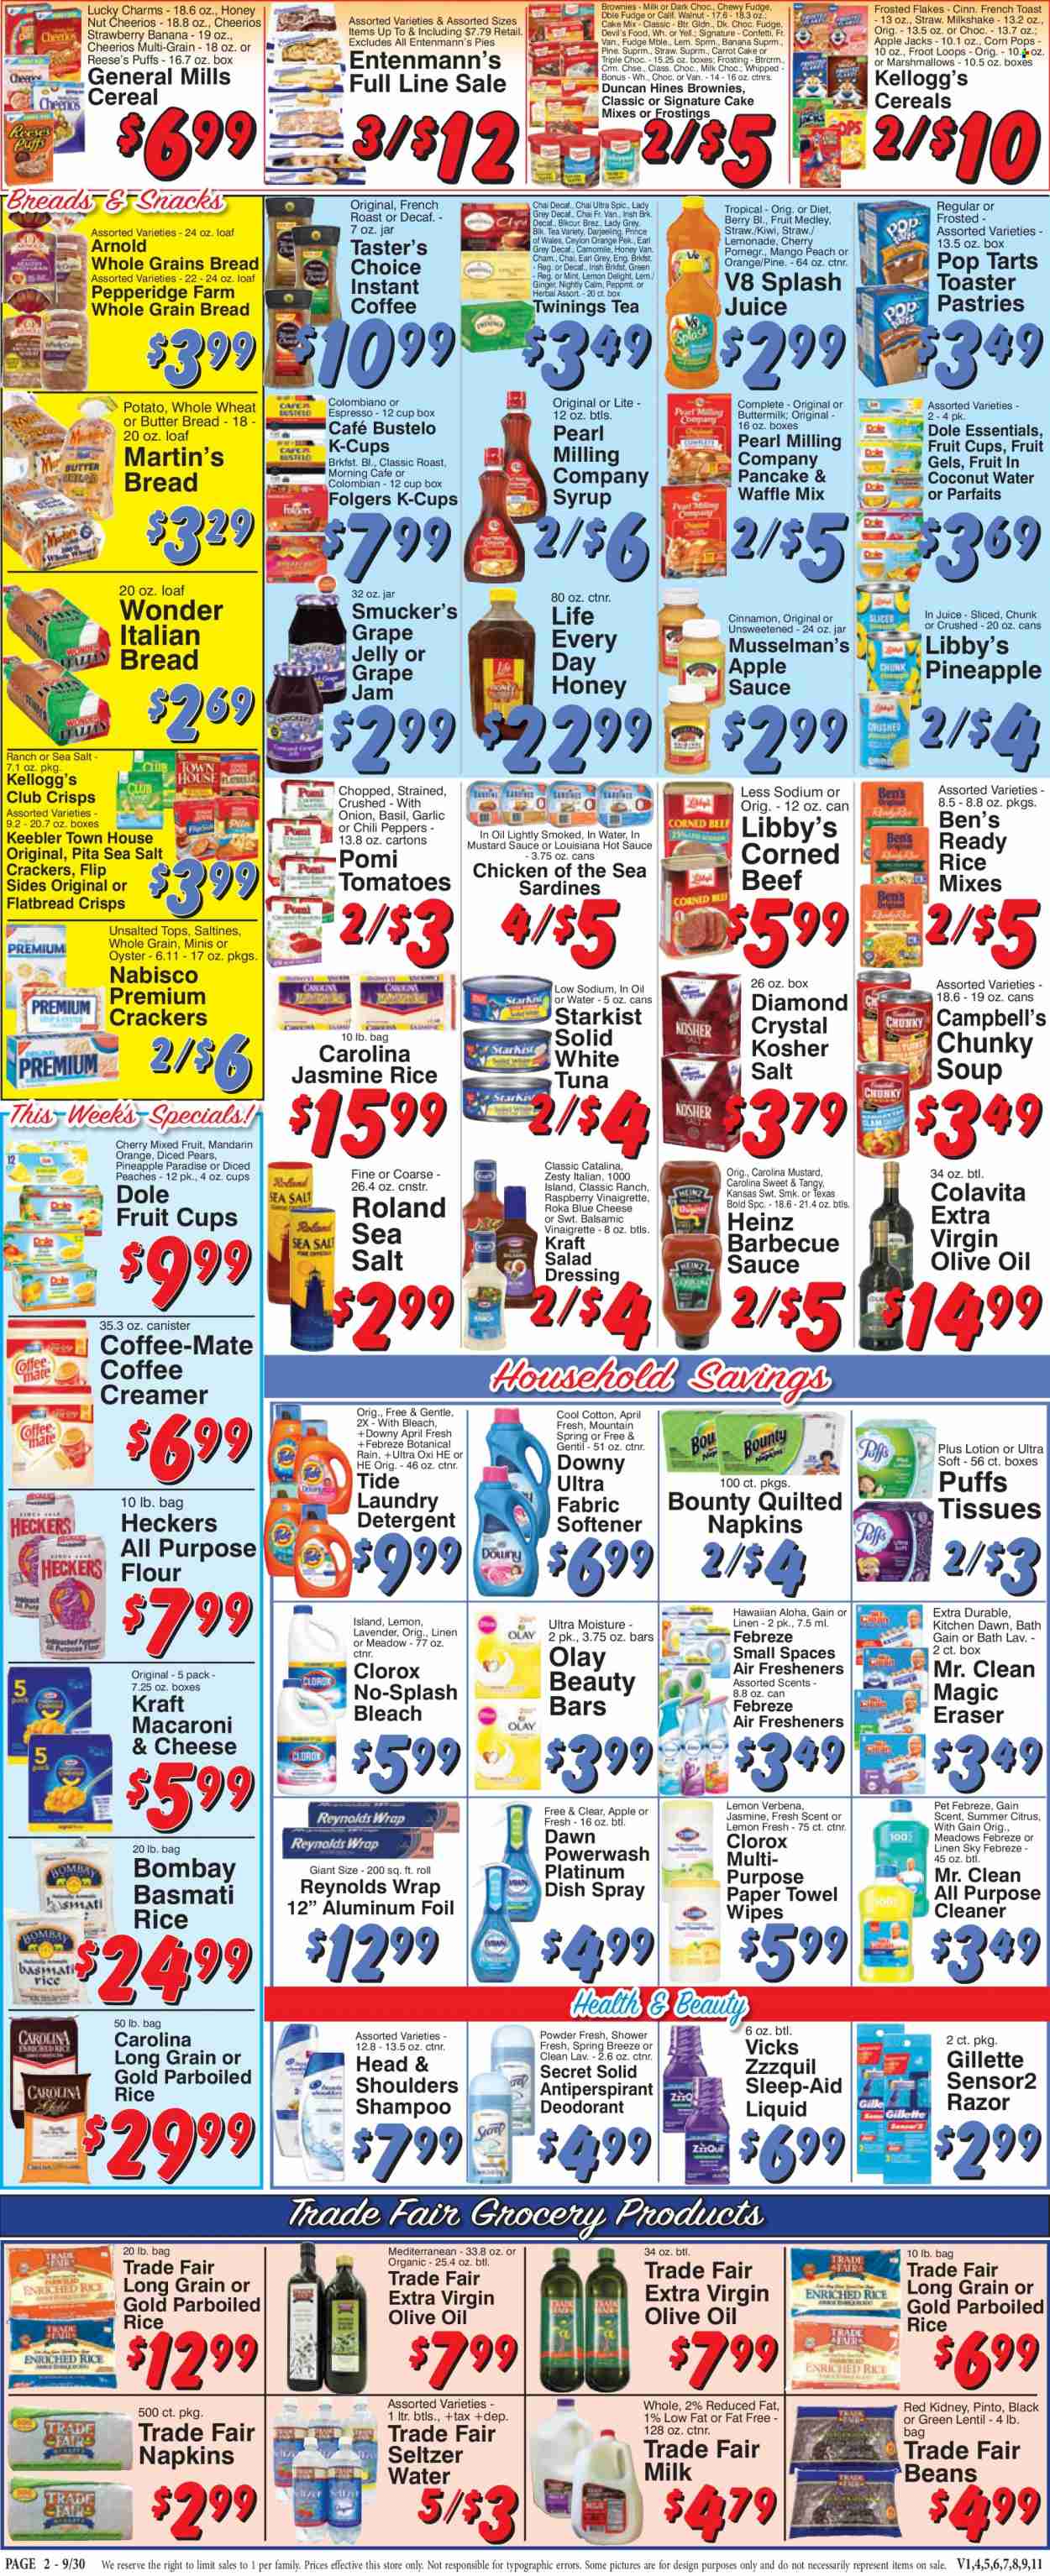 thumbnail - Trade Fair Supermarket Flyer - 09/30/2022 - 10/06/2022 - Sales products - bread, pita, flatbread, puffs, Entenmann's, cake mix, garlic, ginger, tomatoes, chili peppers, Dole, kiwi, mandarines, pineapple, pears, fruit cup, sardines, tuna, oysters, StarKist, Campbell's, macaroni & cheese, soup, pancakes, Kraft®, corned beef, buttermilk, Coffee-Mate, milkshake, creamer, Reese's, fudge, marshmallows, snack, Bounty, jelly, crackers, Kellogg's, Pop-Tarts, Keebler, saltines, all purpose flour, flour, frosting, Heinz, Chicken of the Sea, cereals, Cheerios, Frosted Flakes, Corn Pops, basmati rice, jasmine rice, parboiled rice, cinnamon, BBQ sauce, mustard, salad dressing, vinaigrette dressing, hot sauce, dressing, mustard sauce, extra virgin olive oil, olive oil, apple sauce, grape jelly, fruit jam, syrup, lemonade, juice, coconut water, seltzer water, tea, Twinings, instant coffee, Folgers, coffee capsules, K-Cups, beef meat, wipes, napkins, tissues, paper towels, detergent, Febreze, Gain, cleaner, bleach, all purpose cleaner, Clorox, Tide, fabric softener, laundry detergent, Downy Laundry, shampoo, Olay, Head & Shoulders, anti-perspirant, deodorant, Gillette, razor, toaster. Page 2.